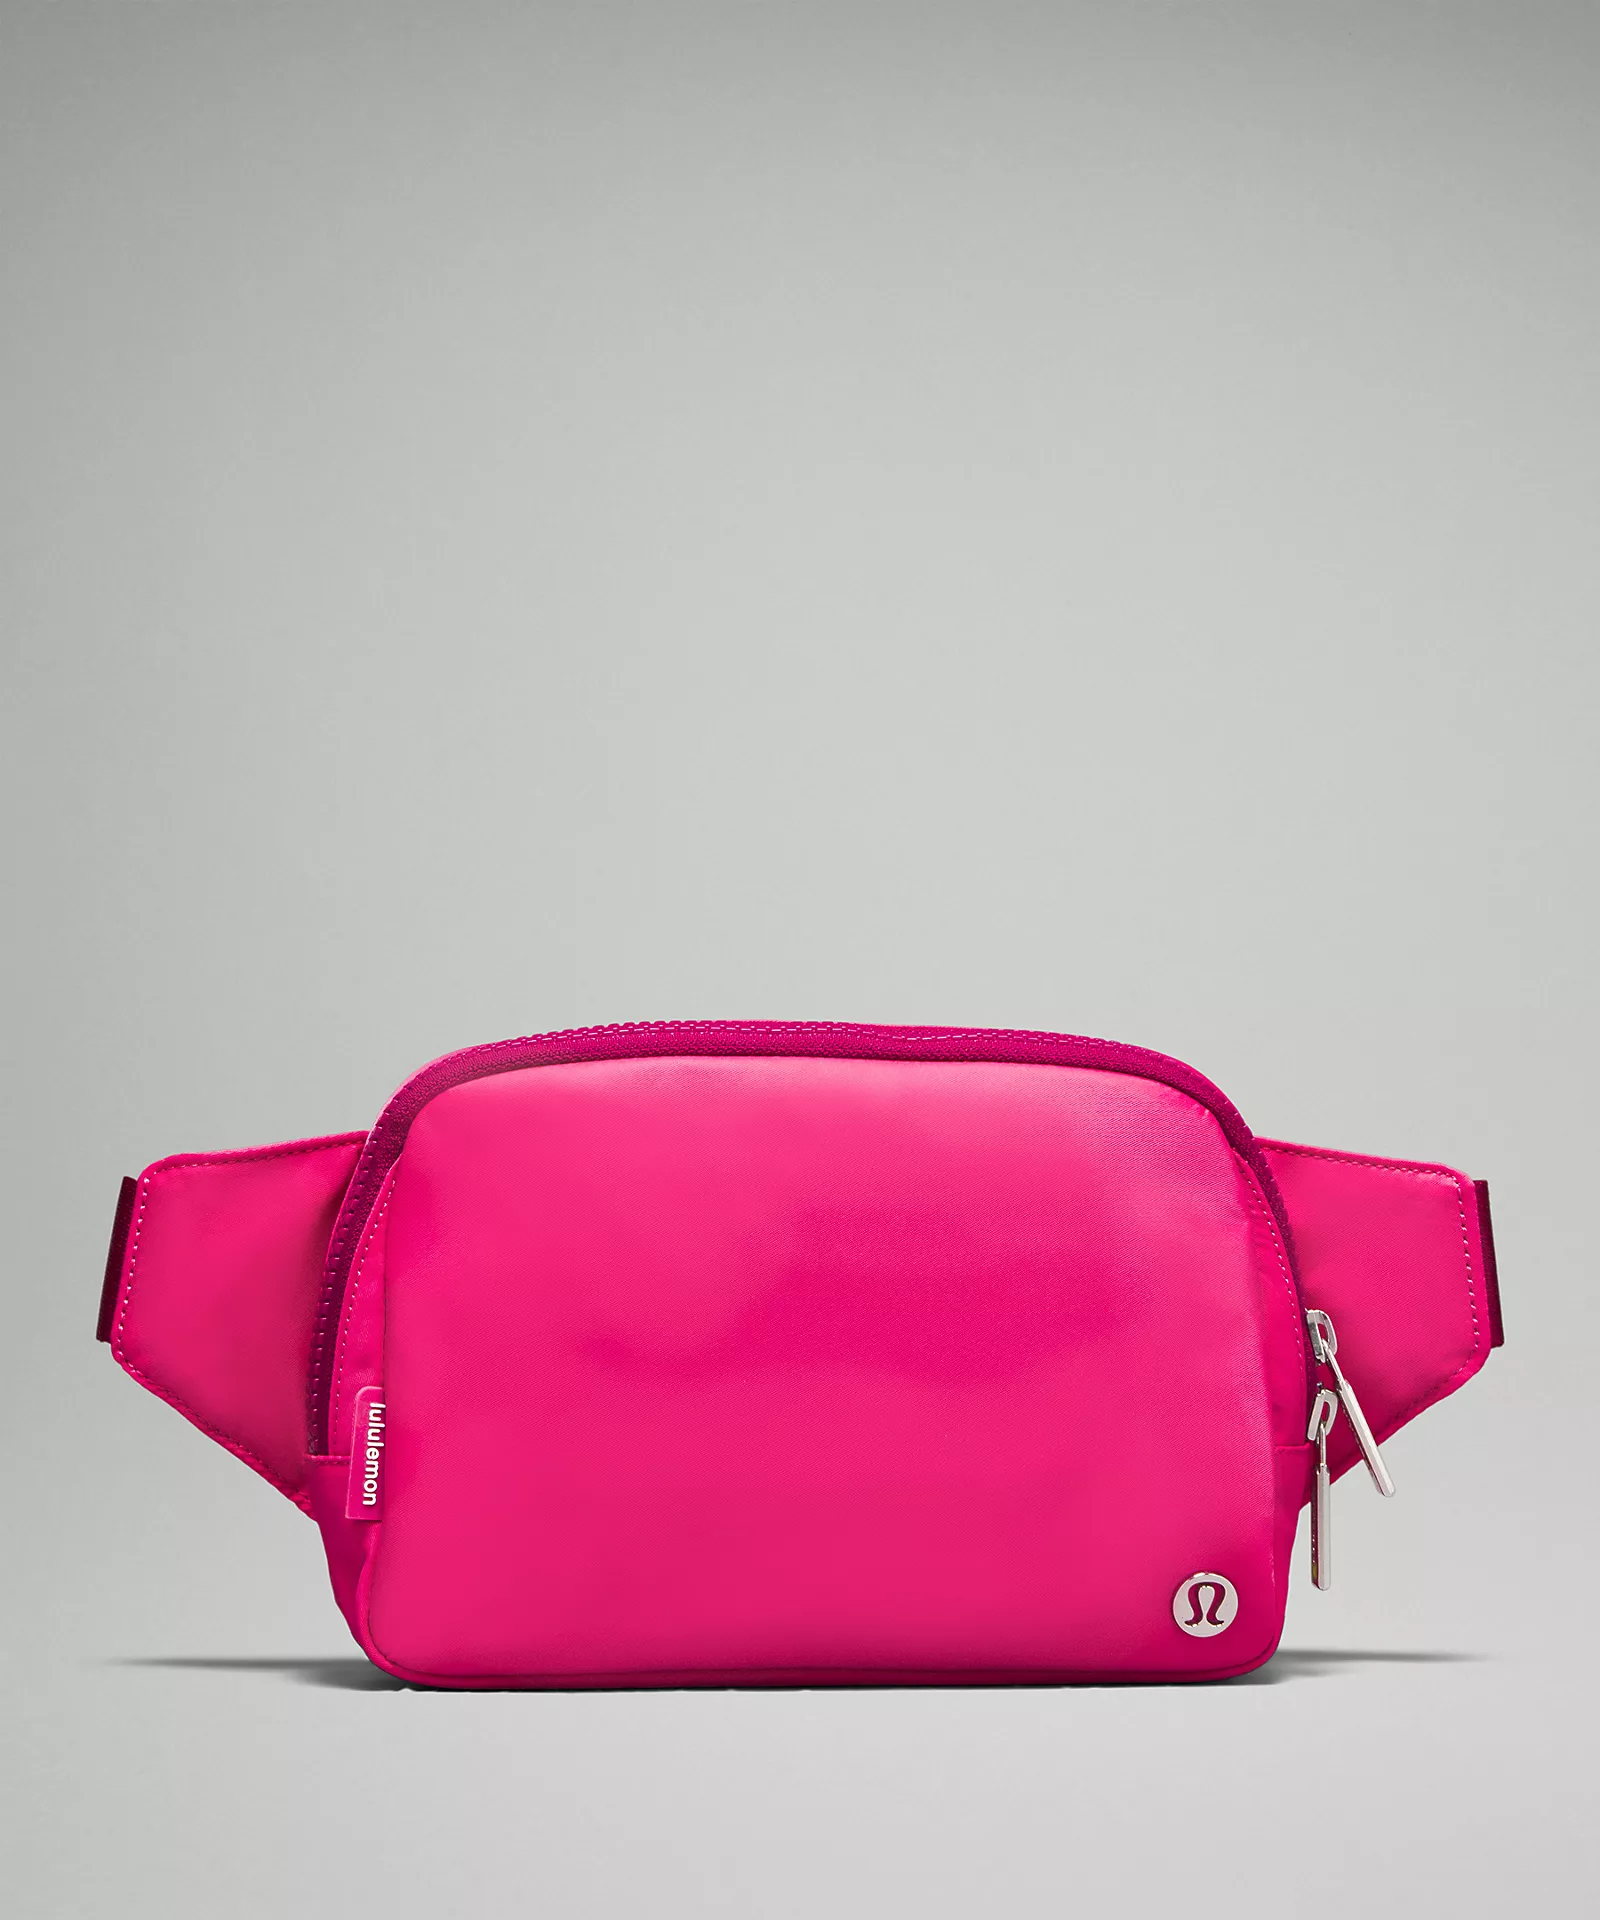 Lululemon now has a clear belt bag: Shop it while you can - Good ...